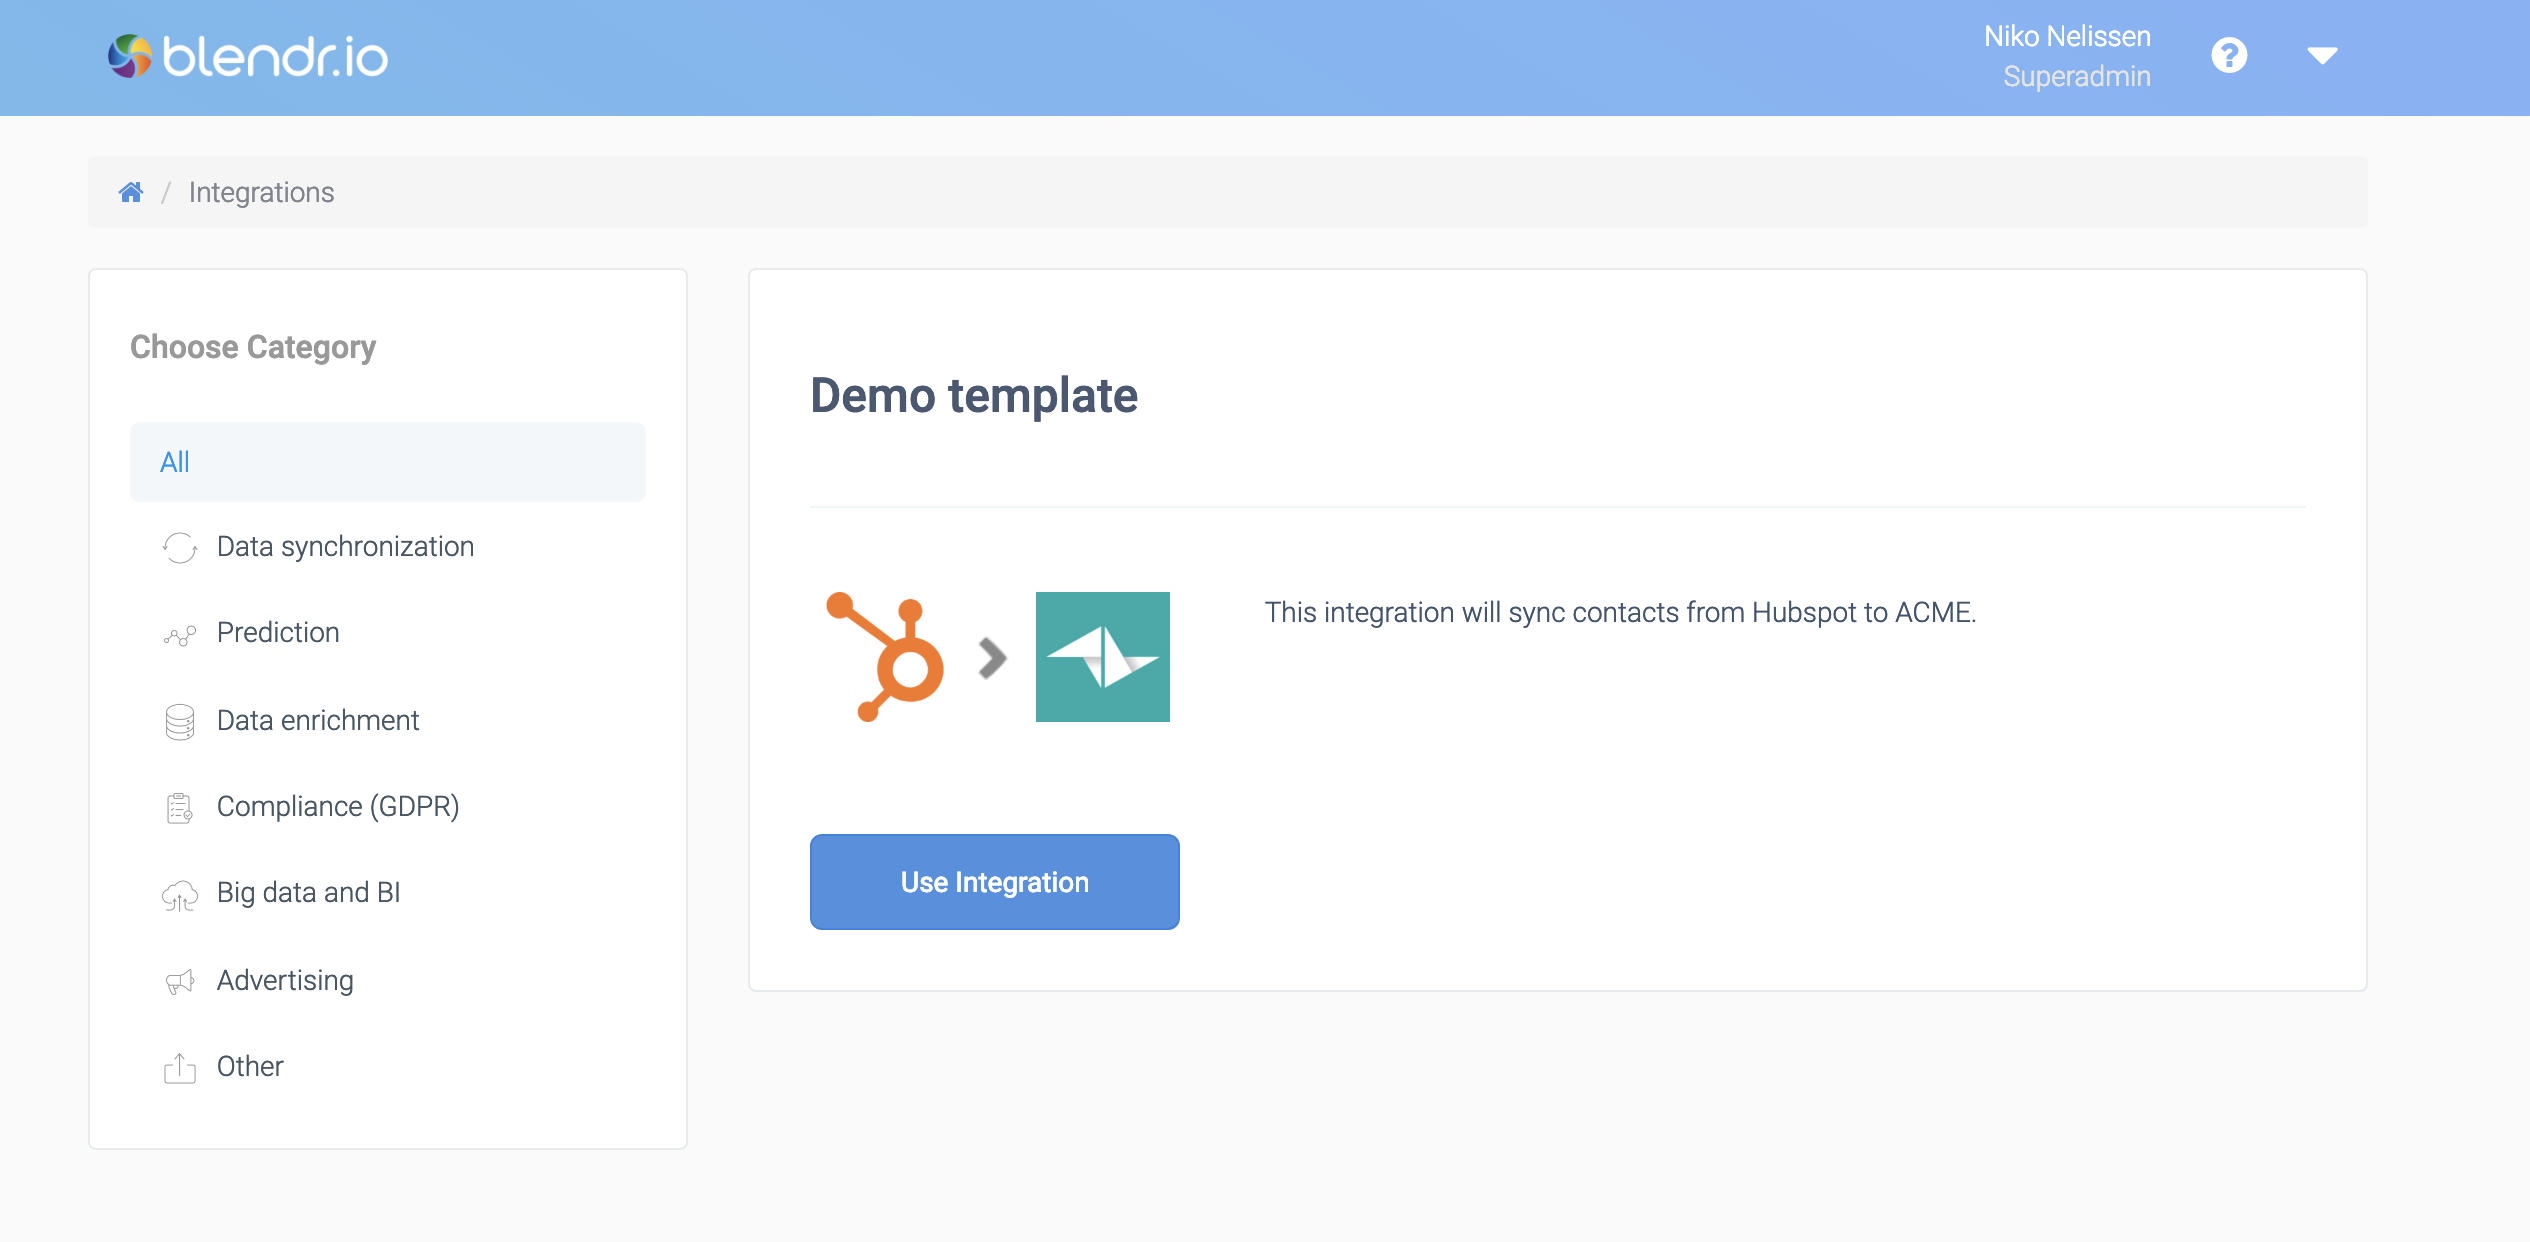 The Demo template is selected. A Use Integration button appears.